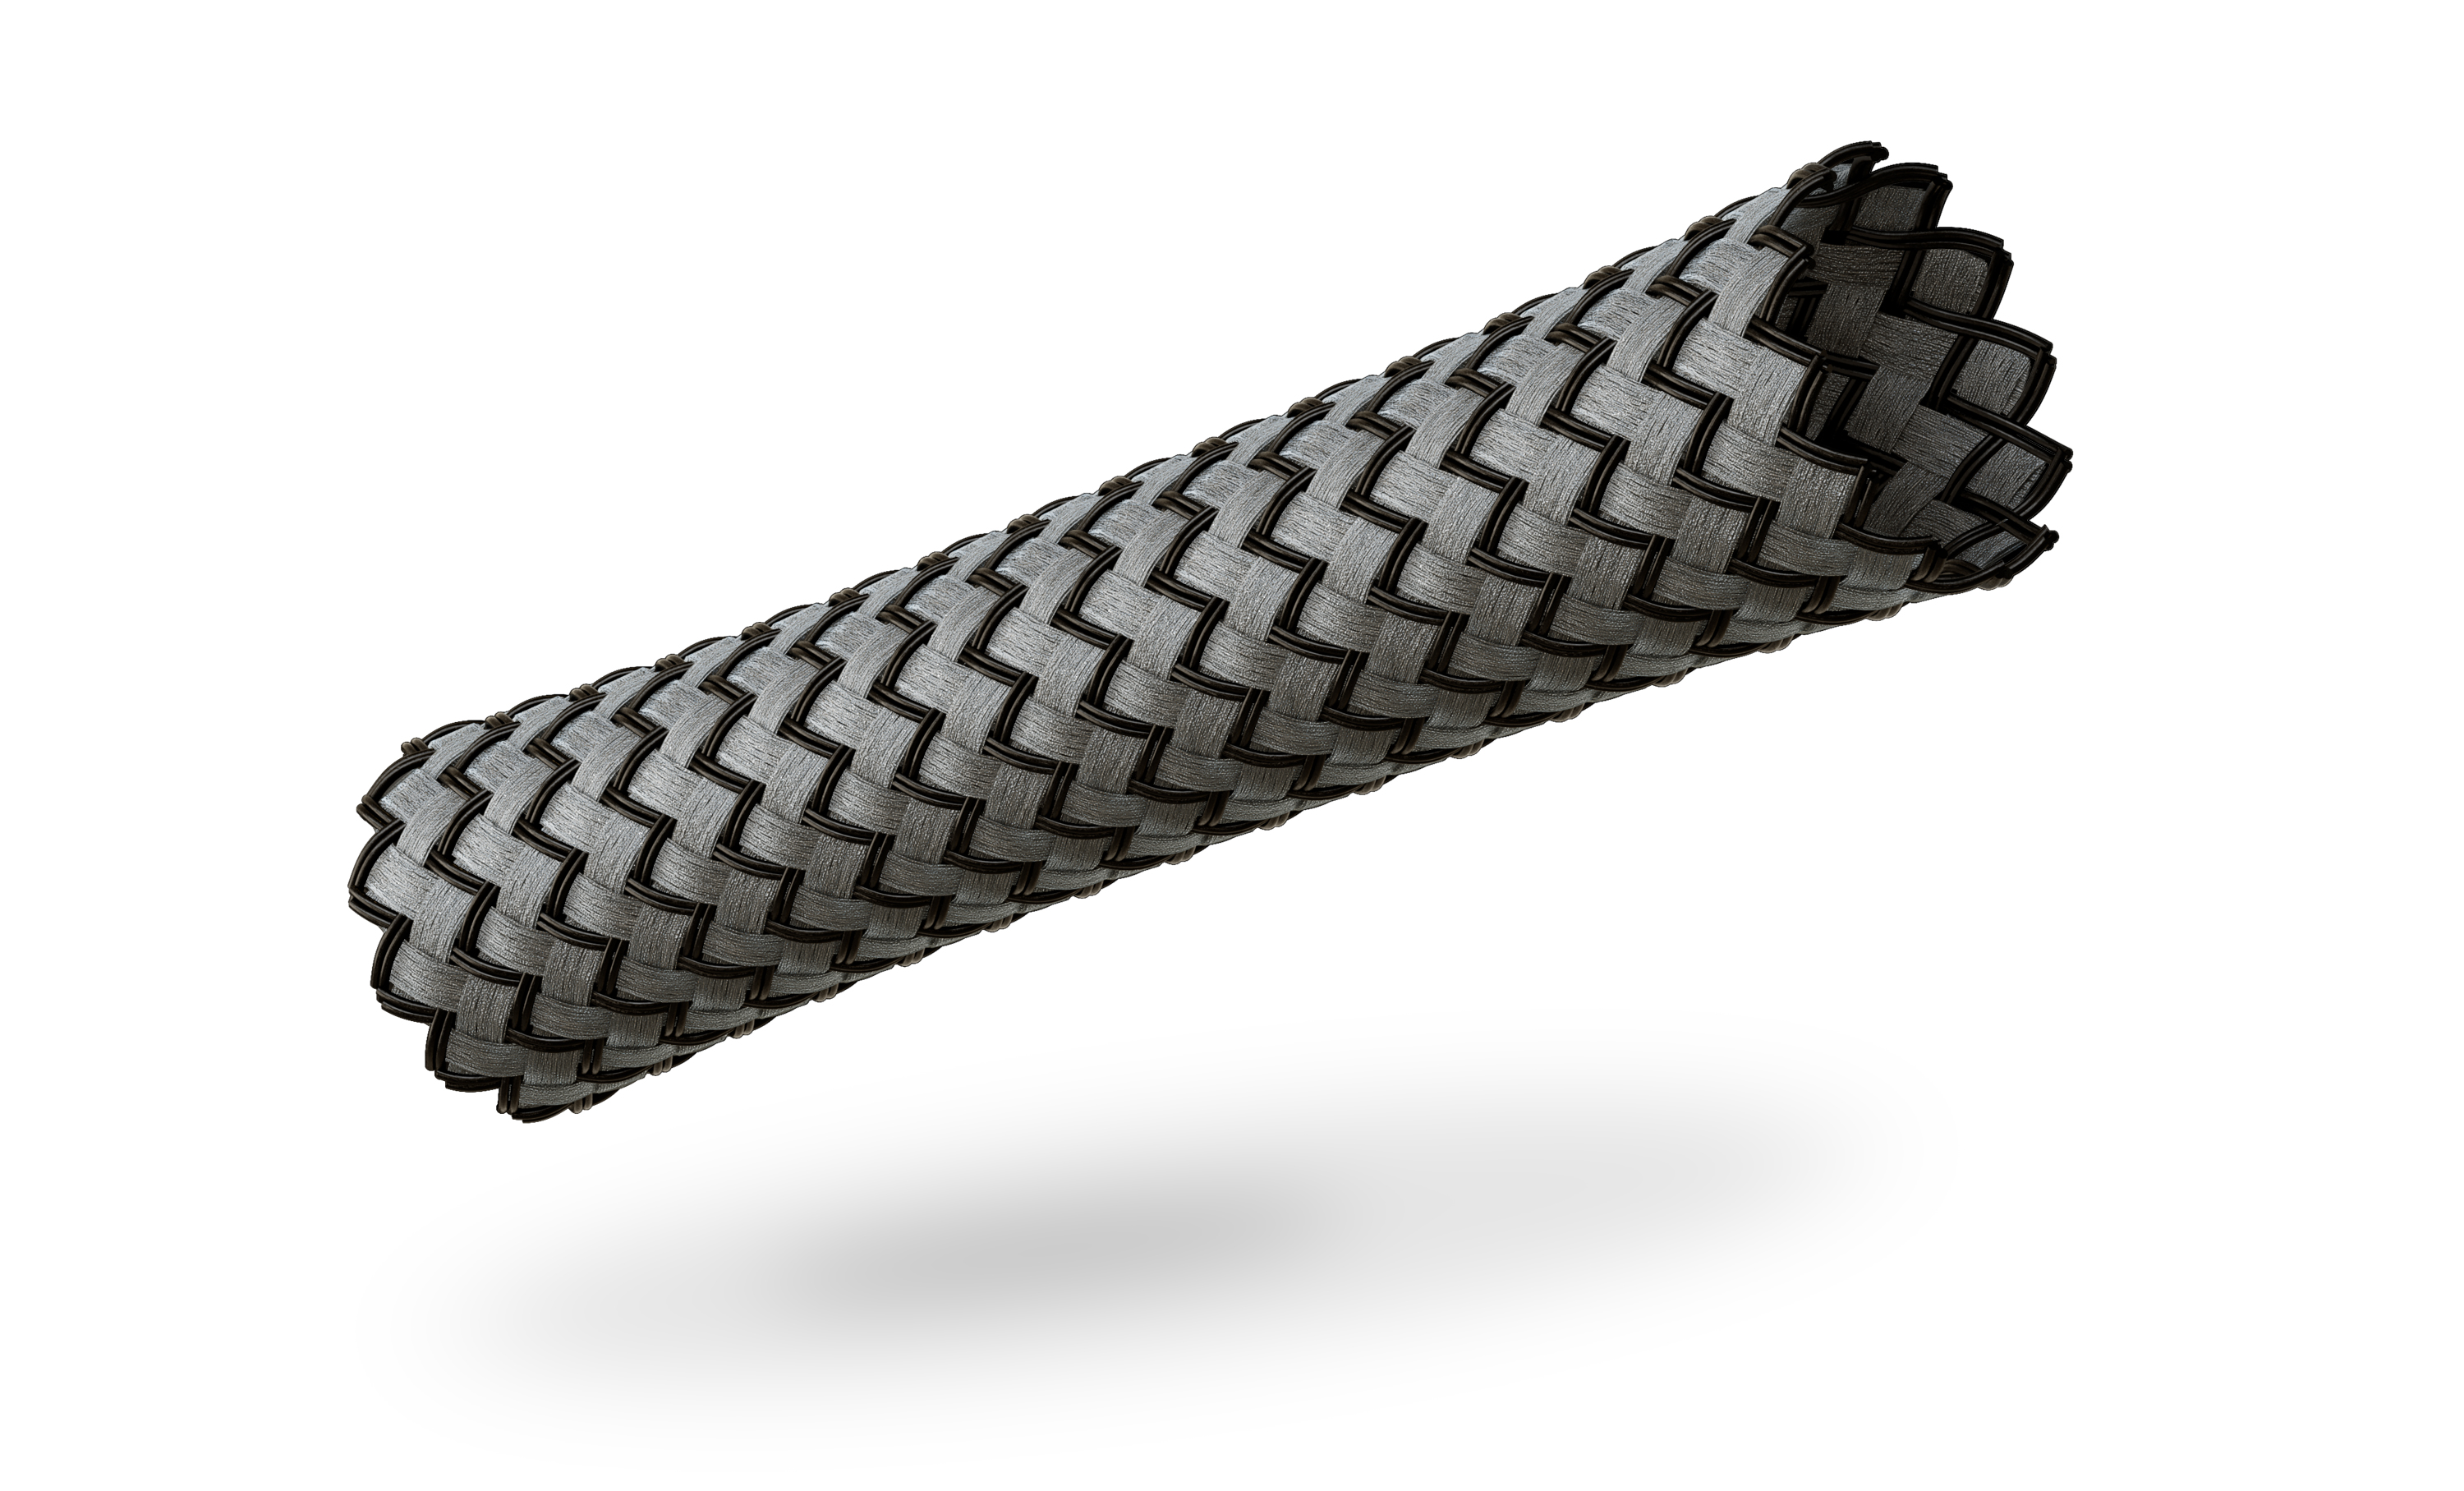 Silver braided sleeving from VIABLUE™ is a high quality cable jacket made of durable PET braid and has a silver color. It is ideal for use as protection for cables and wires and provides enhanced aesthetics for cable connections.